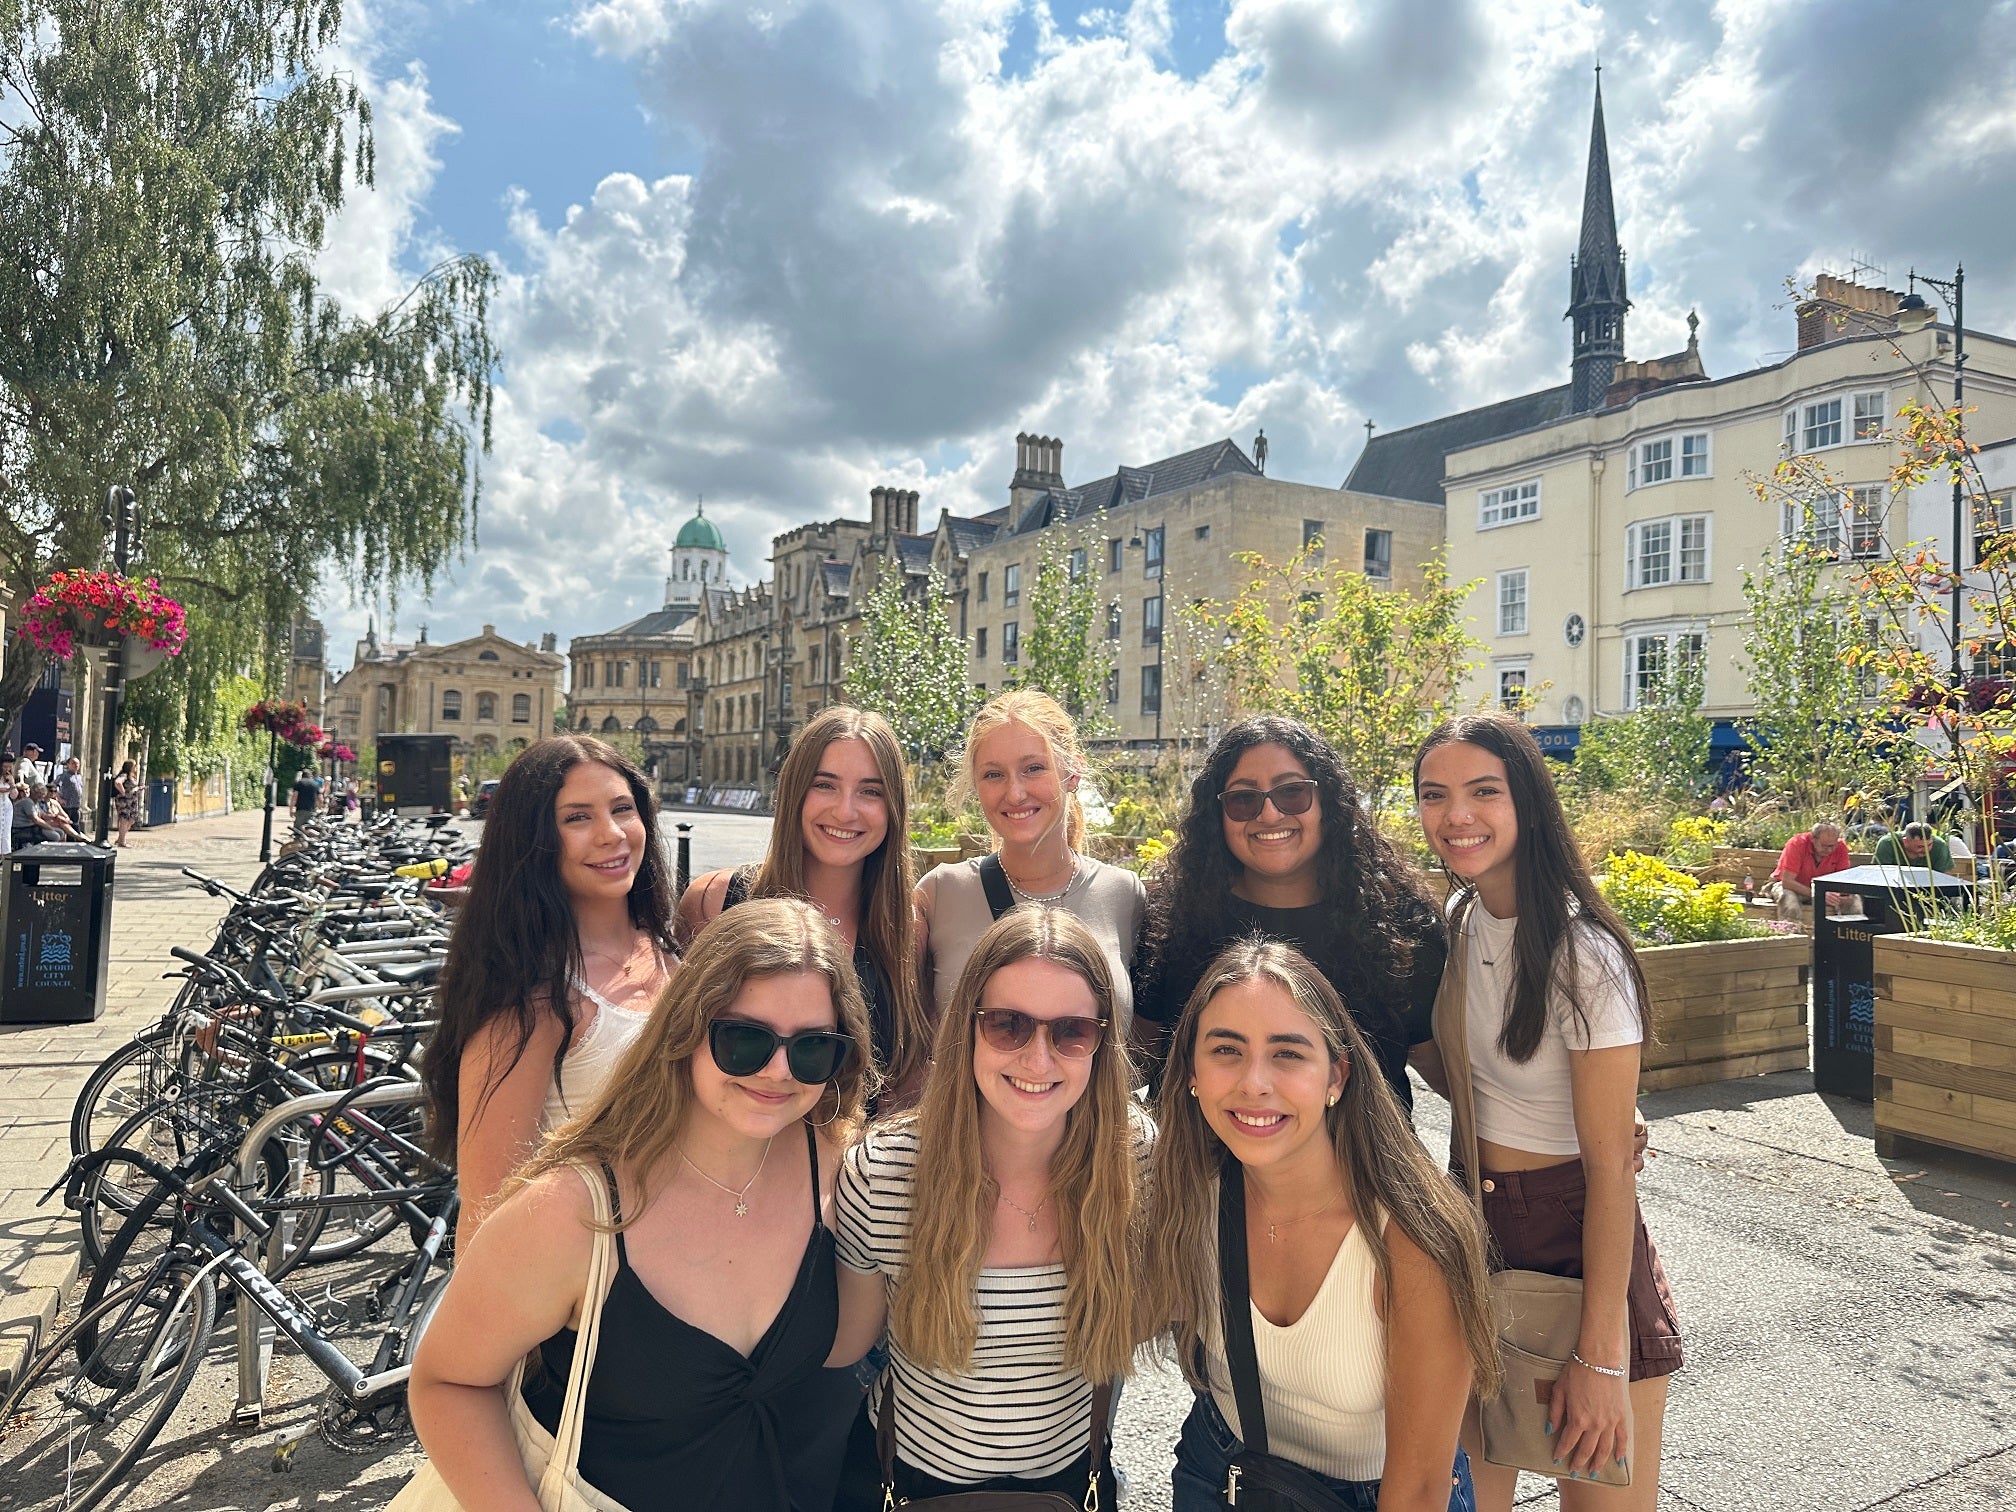 Students in Edson College's study abroad program in London pose for a group photo on the streets of Oxford.